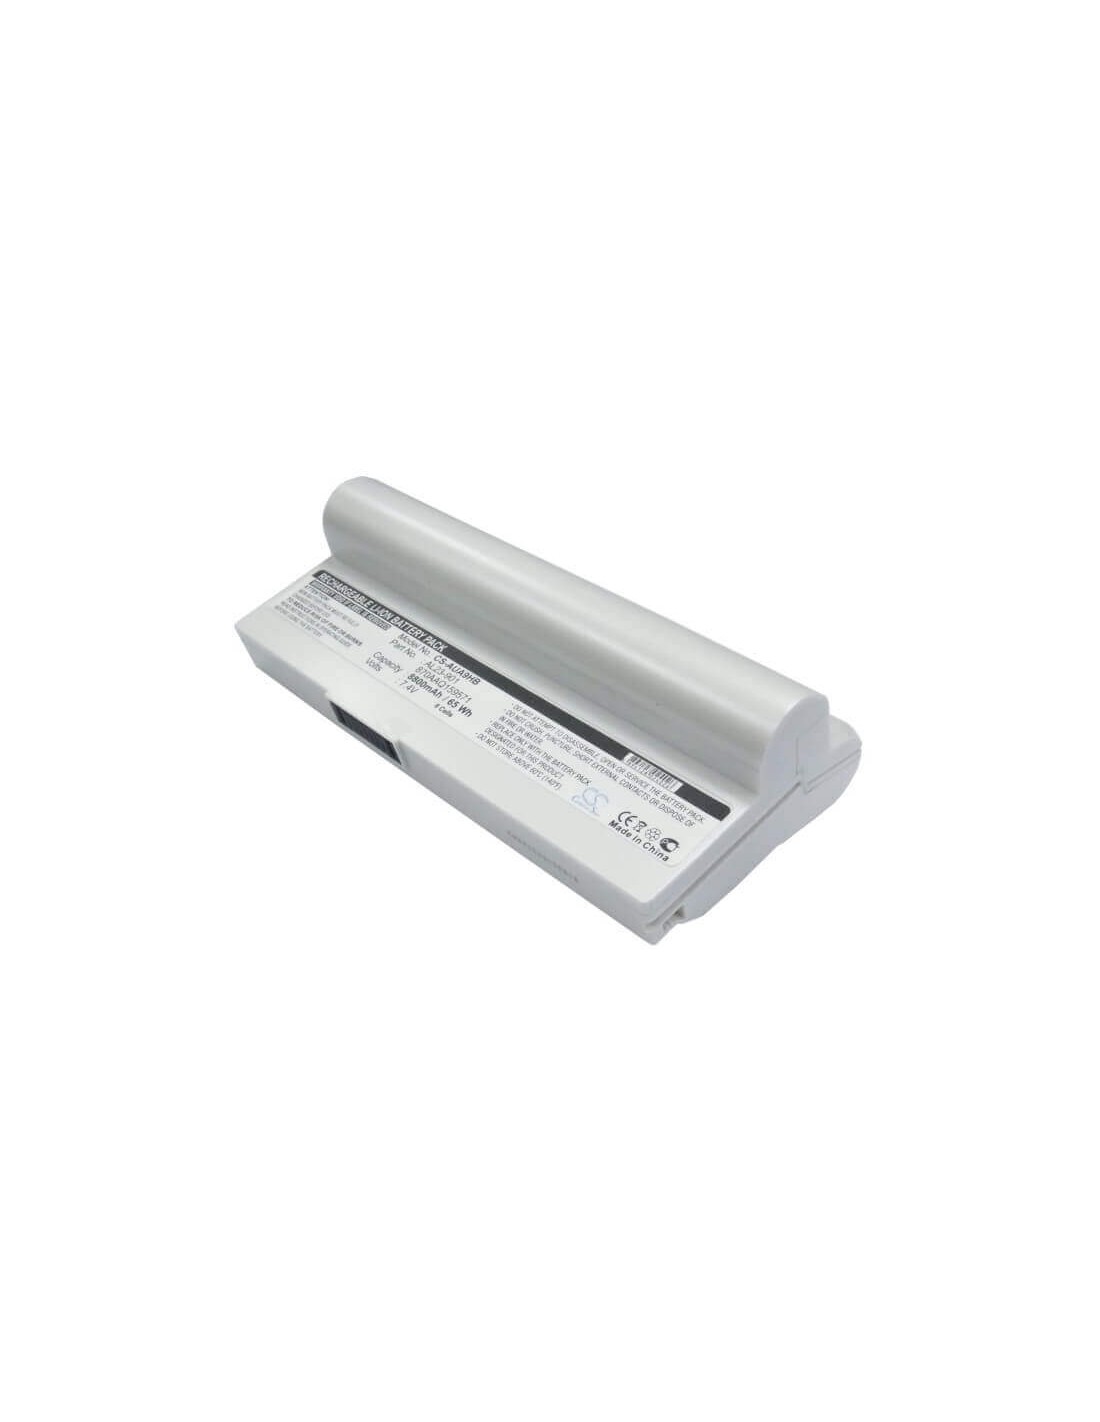 White Battery for Asus Eee Pc 901, Eee Pc 904, Eee Pc 904hd 7.4V, 8800mAh - 65.12Wh